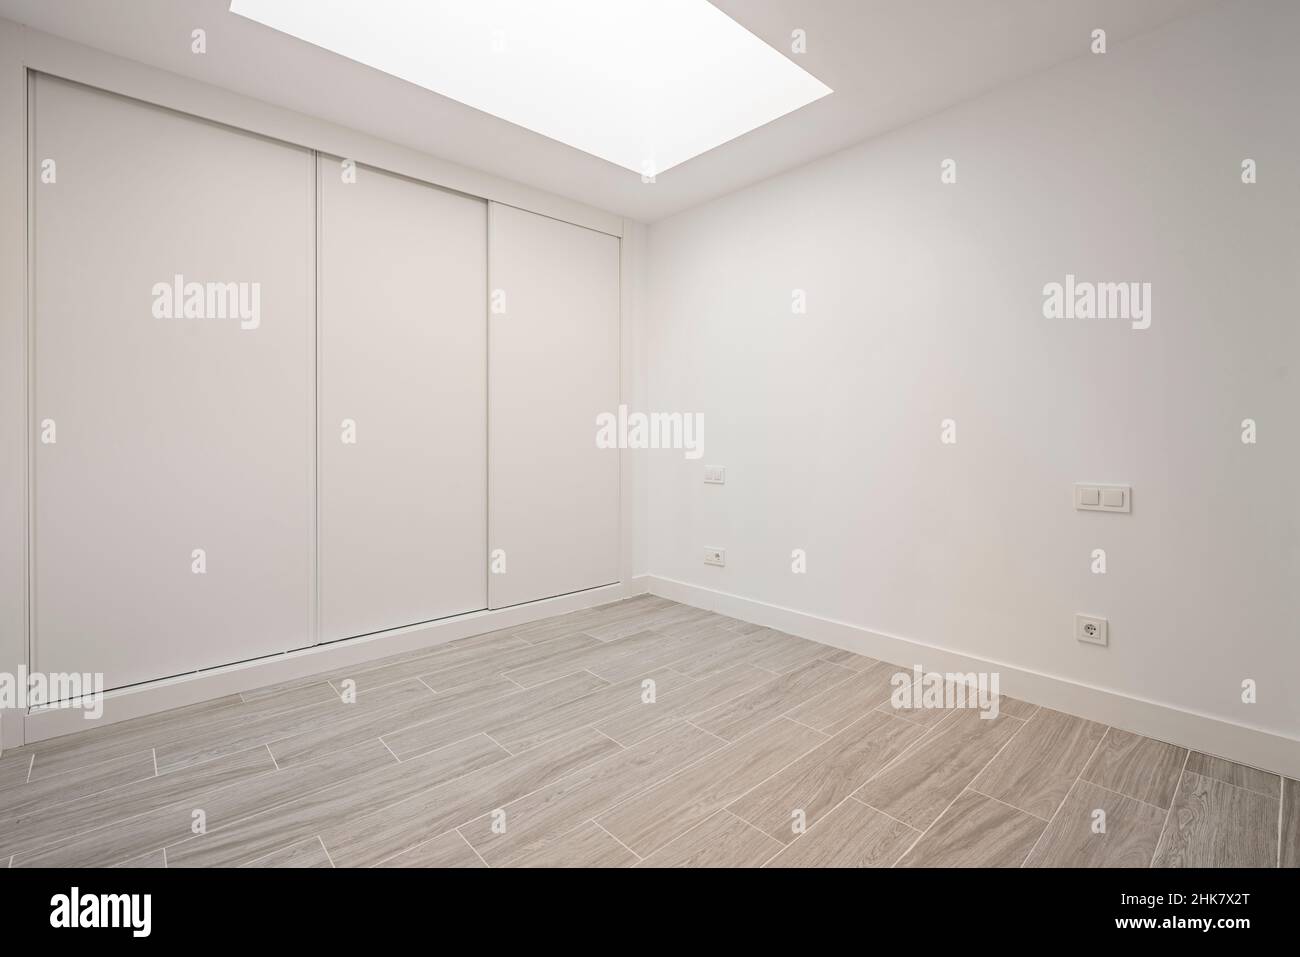 Angular view of a built-in wardrobe with white sliding doors and imitation wood stoneware floors and a skylight in the ceiling Stock Photo